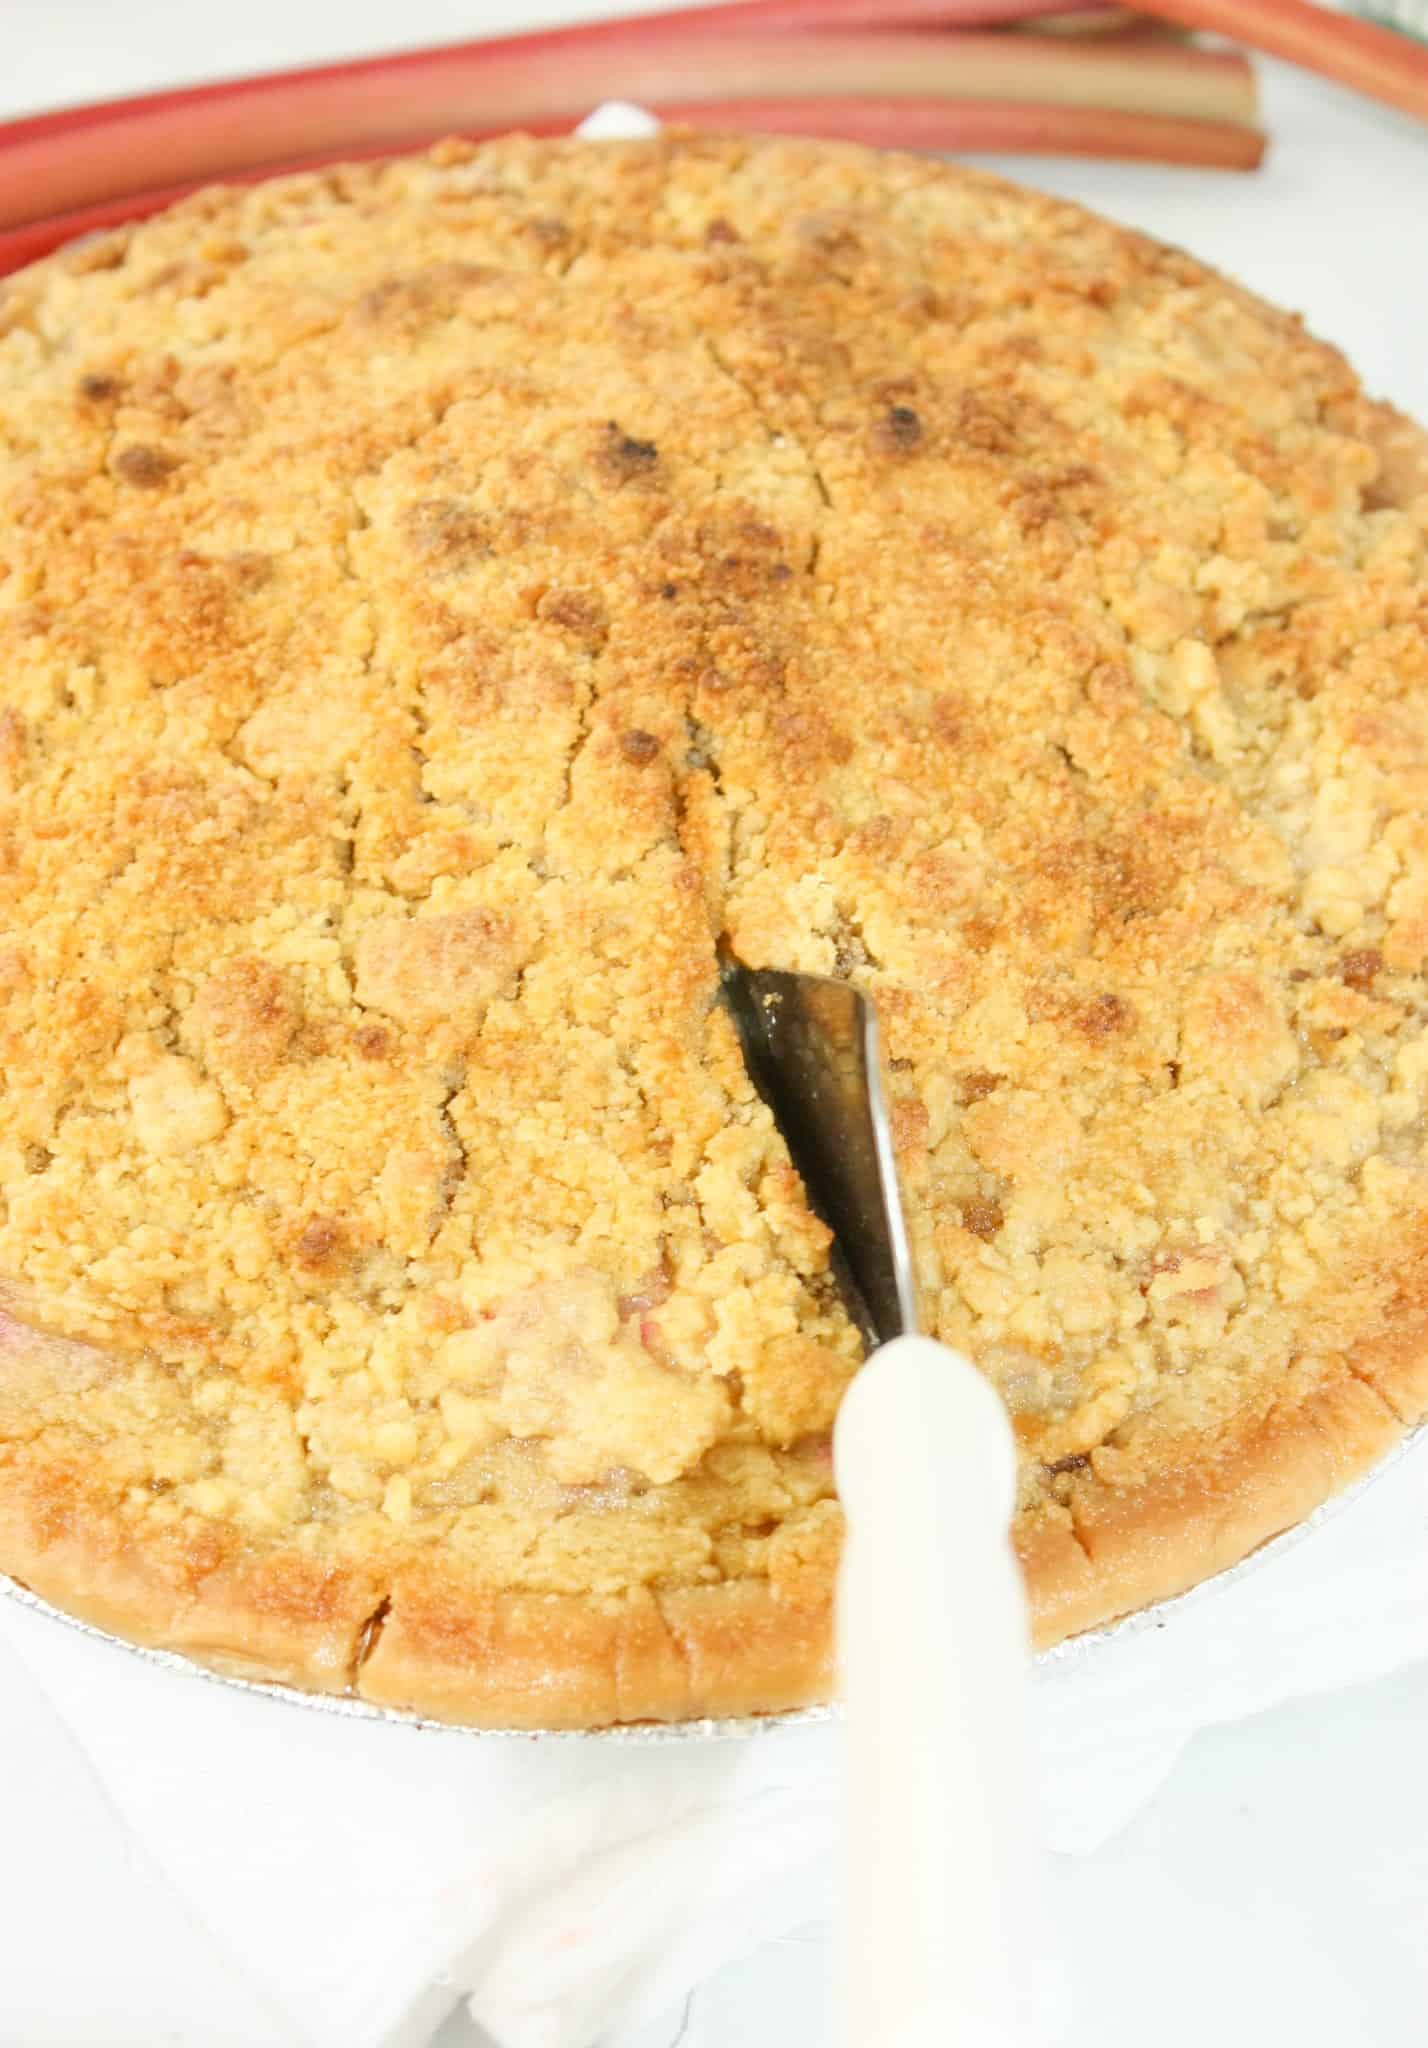 Rhubarb Crumble Pie is a blend of sweet and slightly tart flavouring.  I look forward to this tasty dessert every year when this spring vegetable is harvested from the garden.